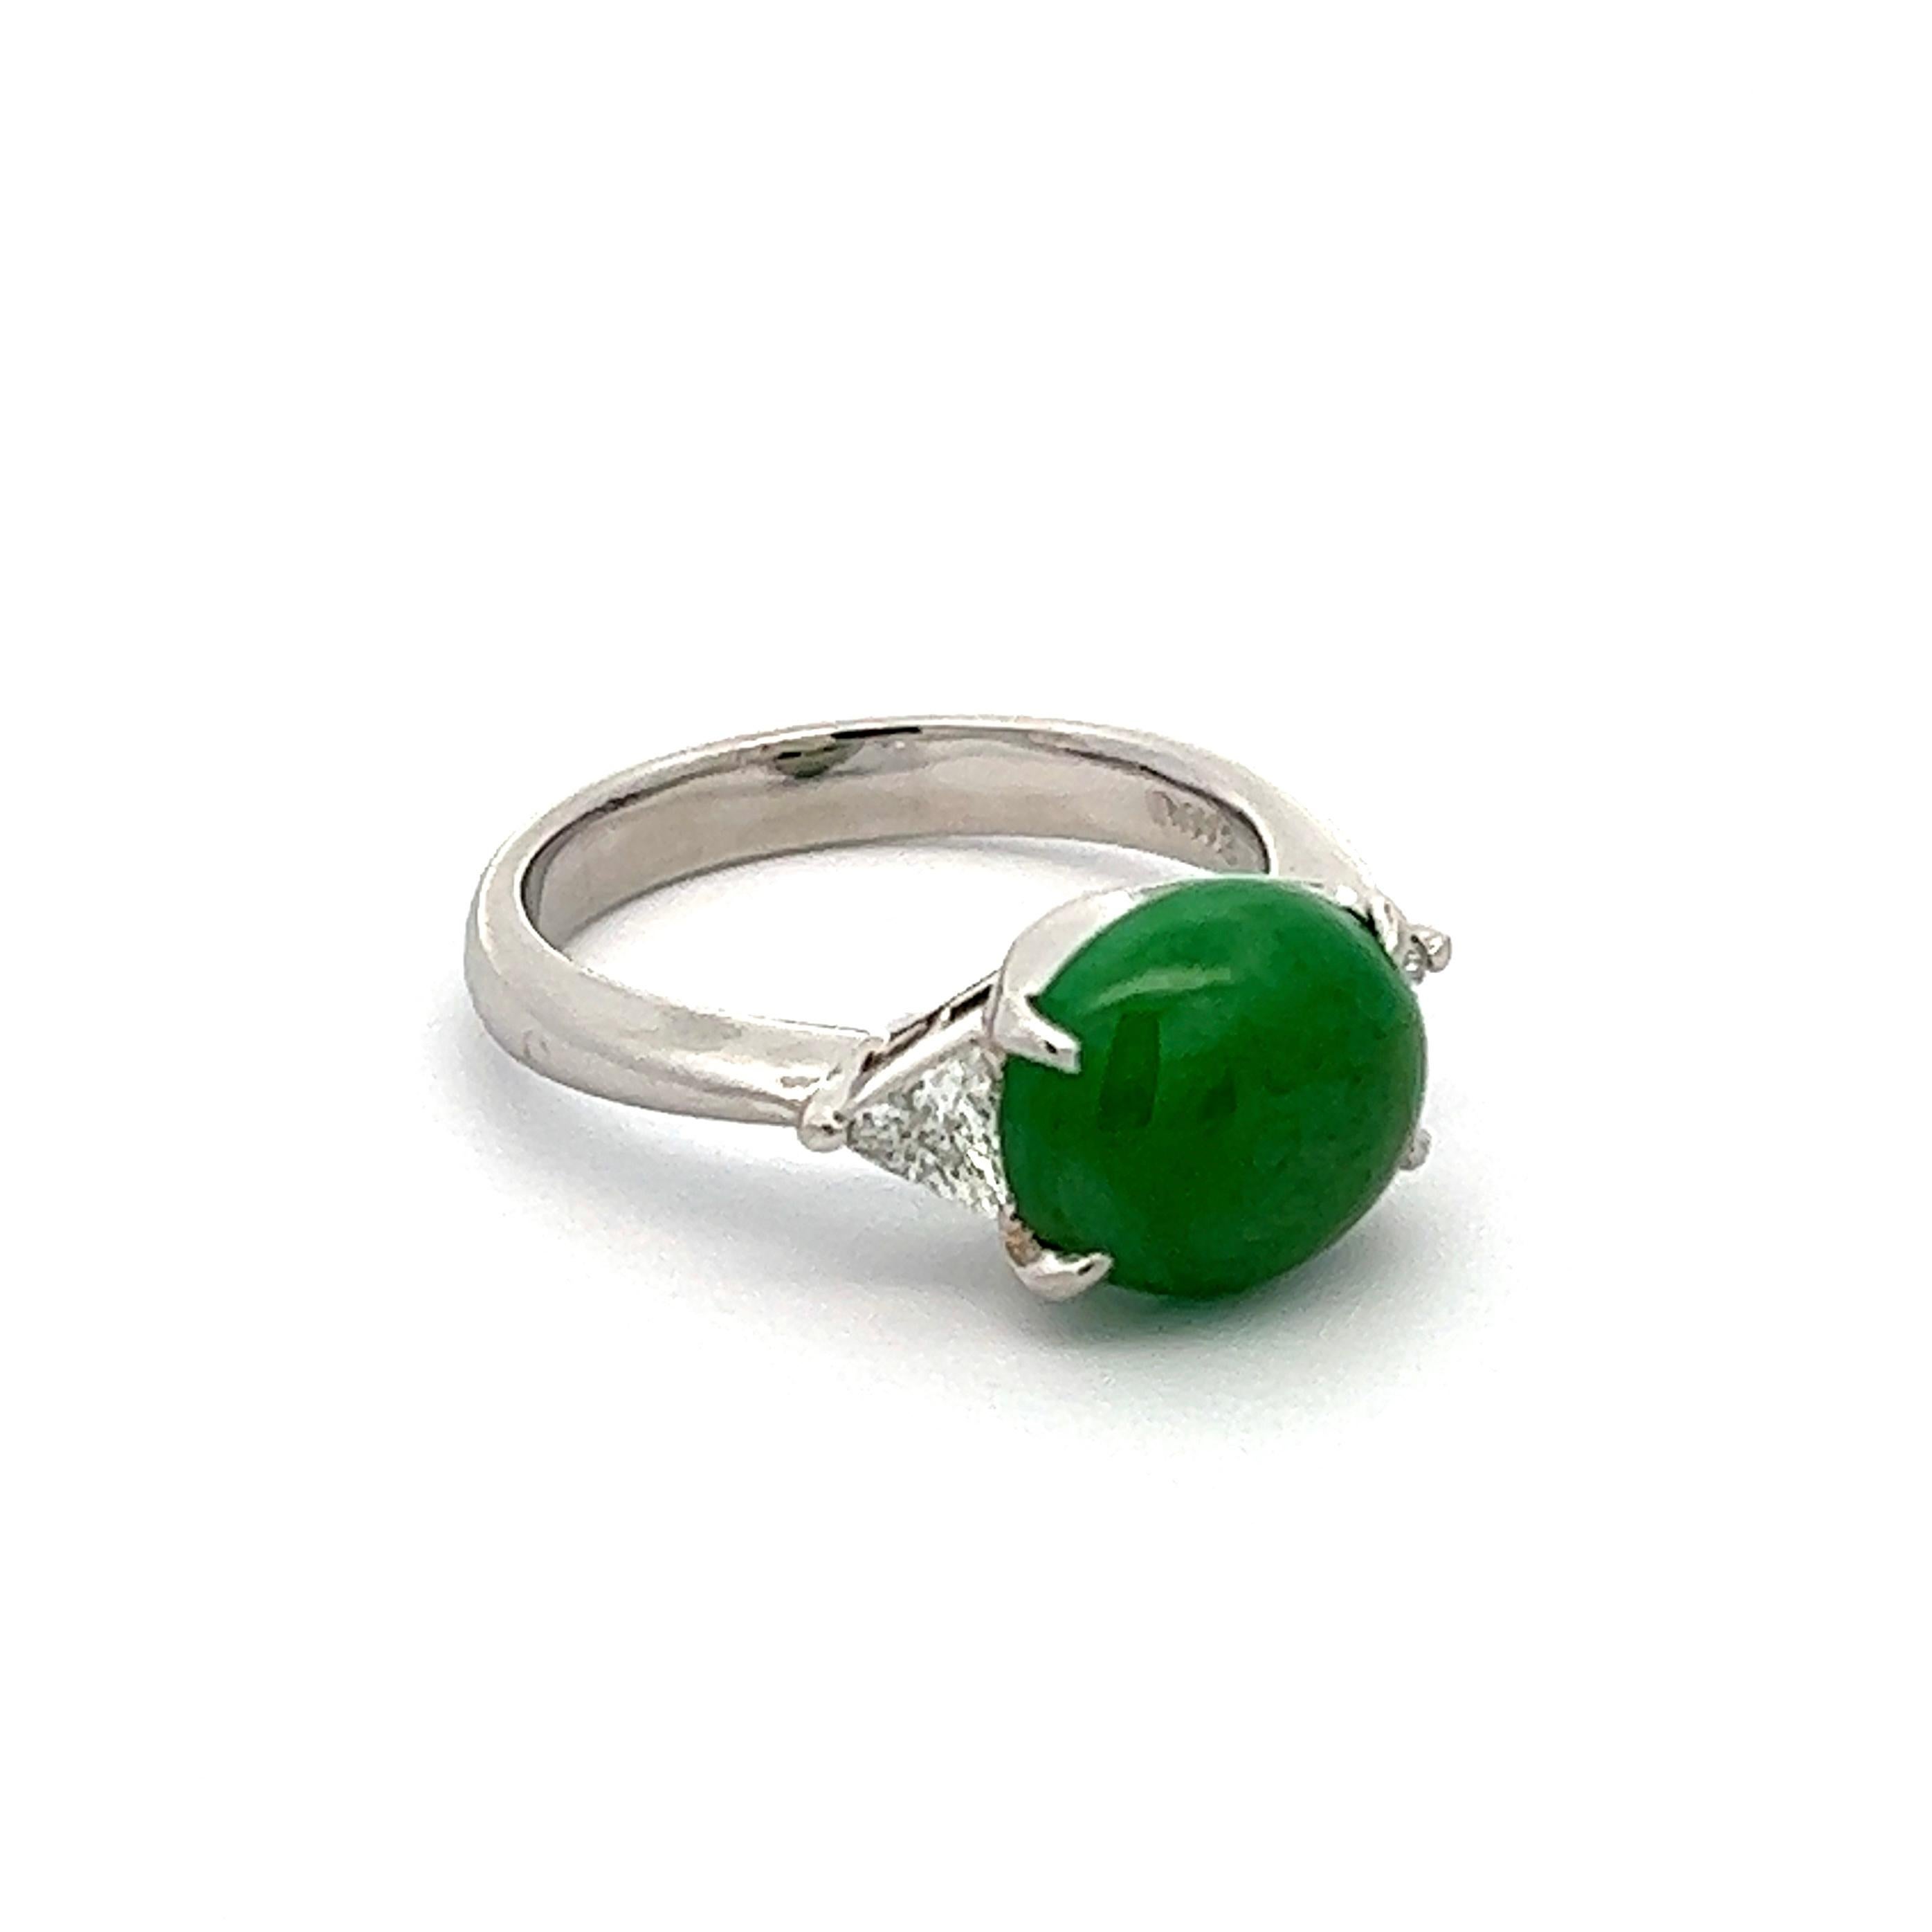 Simply Beautiful! Three Stone Platinum Ring, centering a securely nestled Grade A Jadeite Jade weighing approx. 3.57 Carat, GIA # 2221572897, either side enhanced by Diamonds, weighing approx. 0.22tcw. Hand crafted Platinum mounting. Ring size 6, we